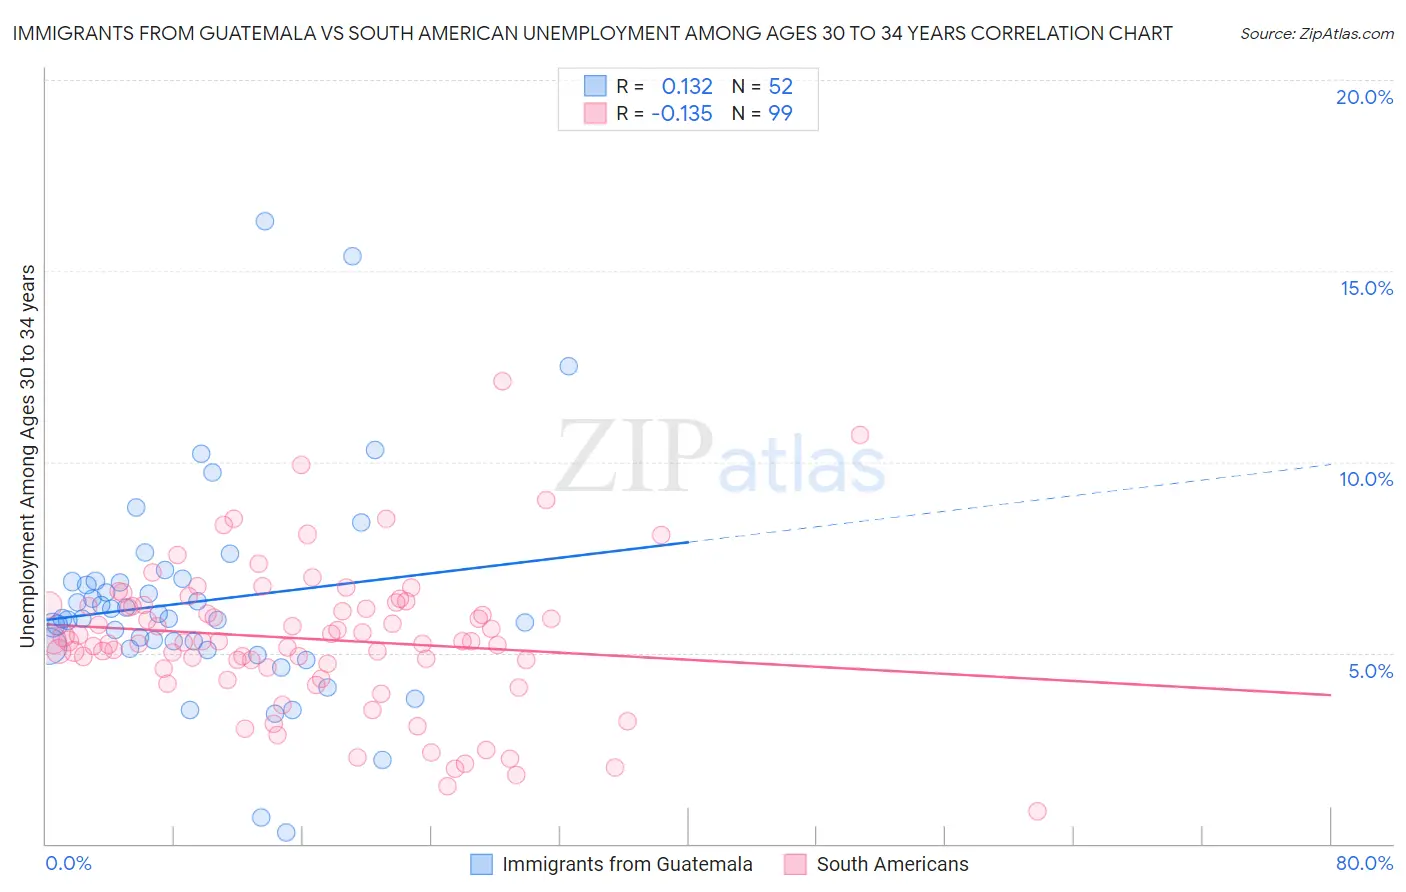 Immigrants from Guatemala vs South American Unemployment Among Ages 30 to 34 years